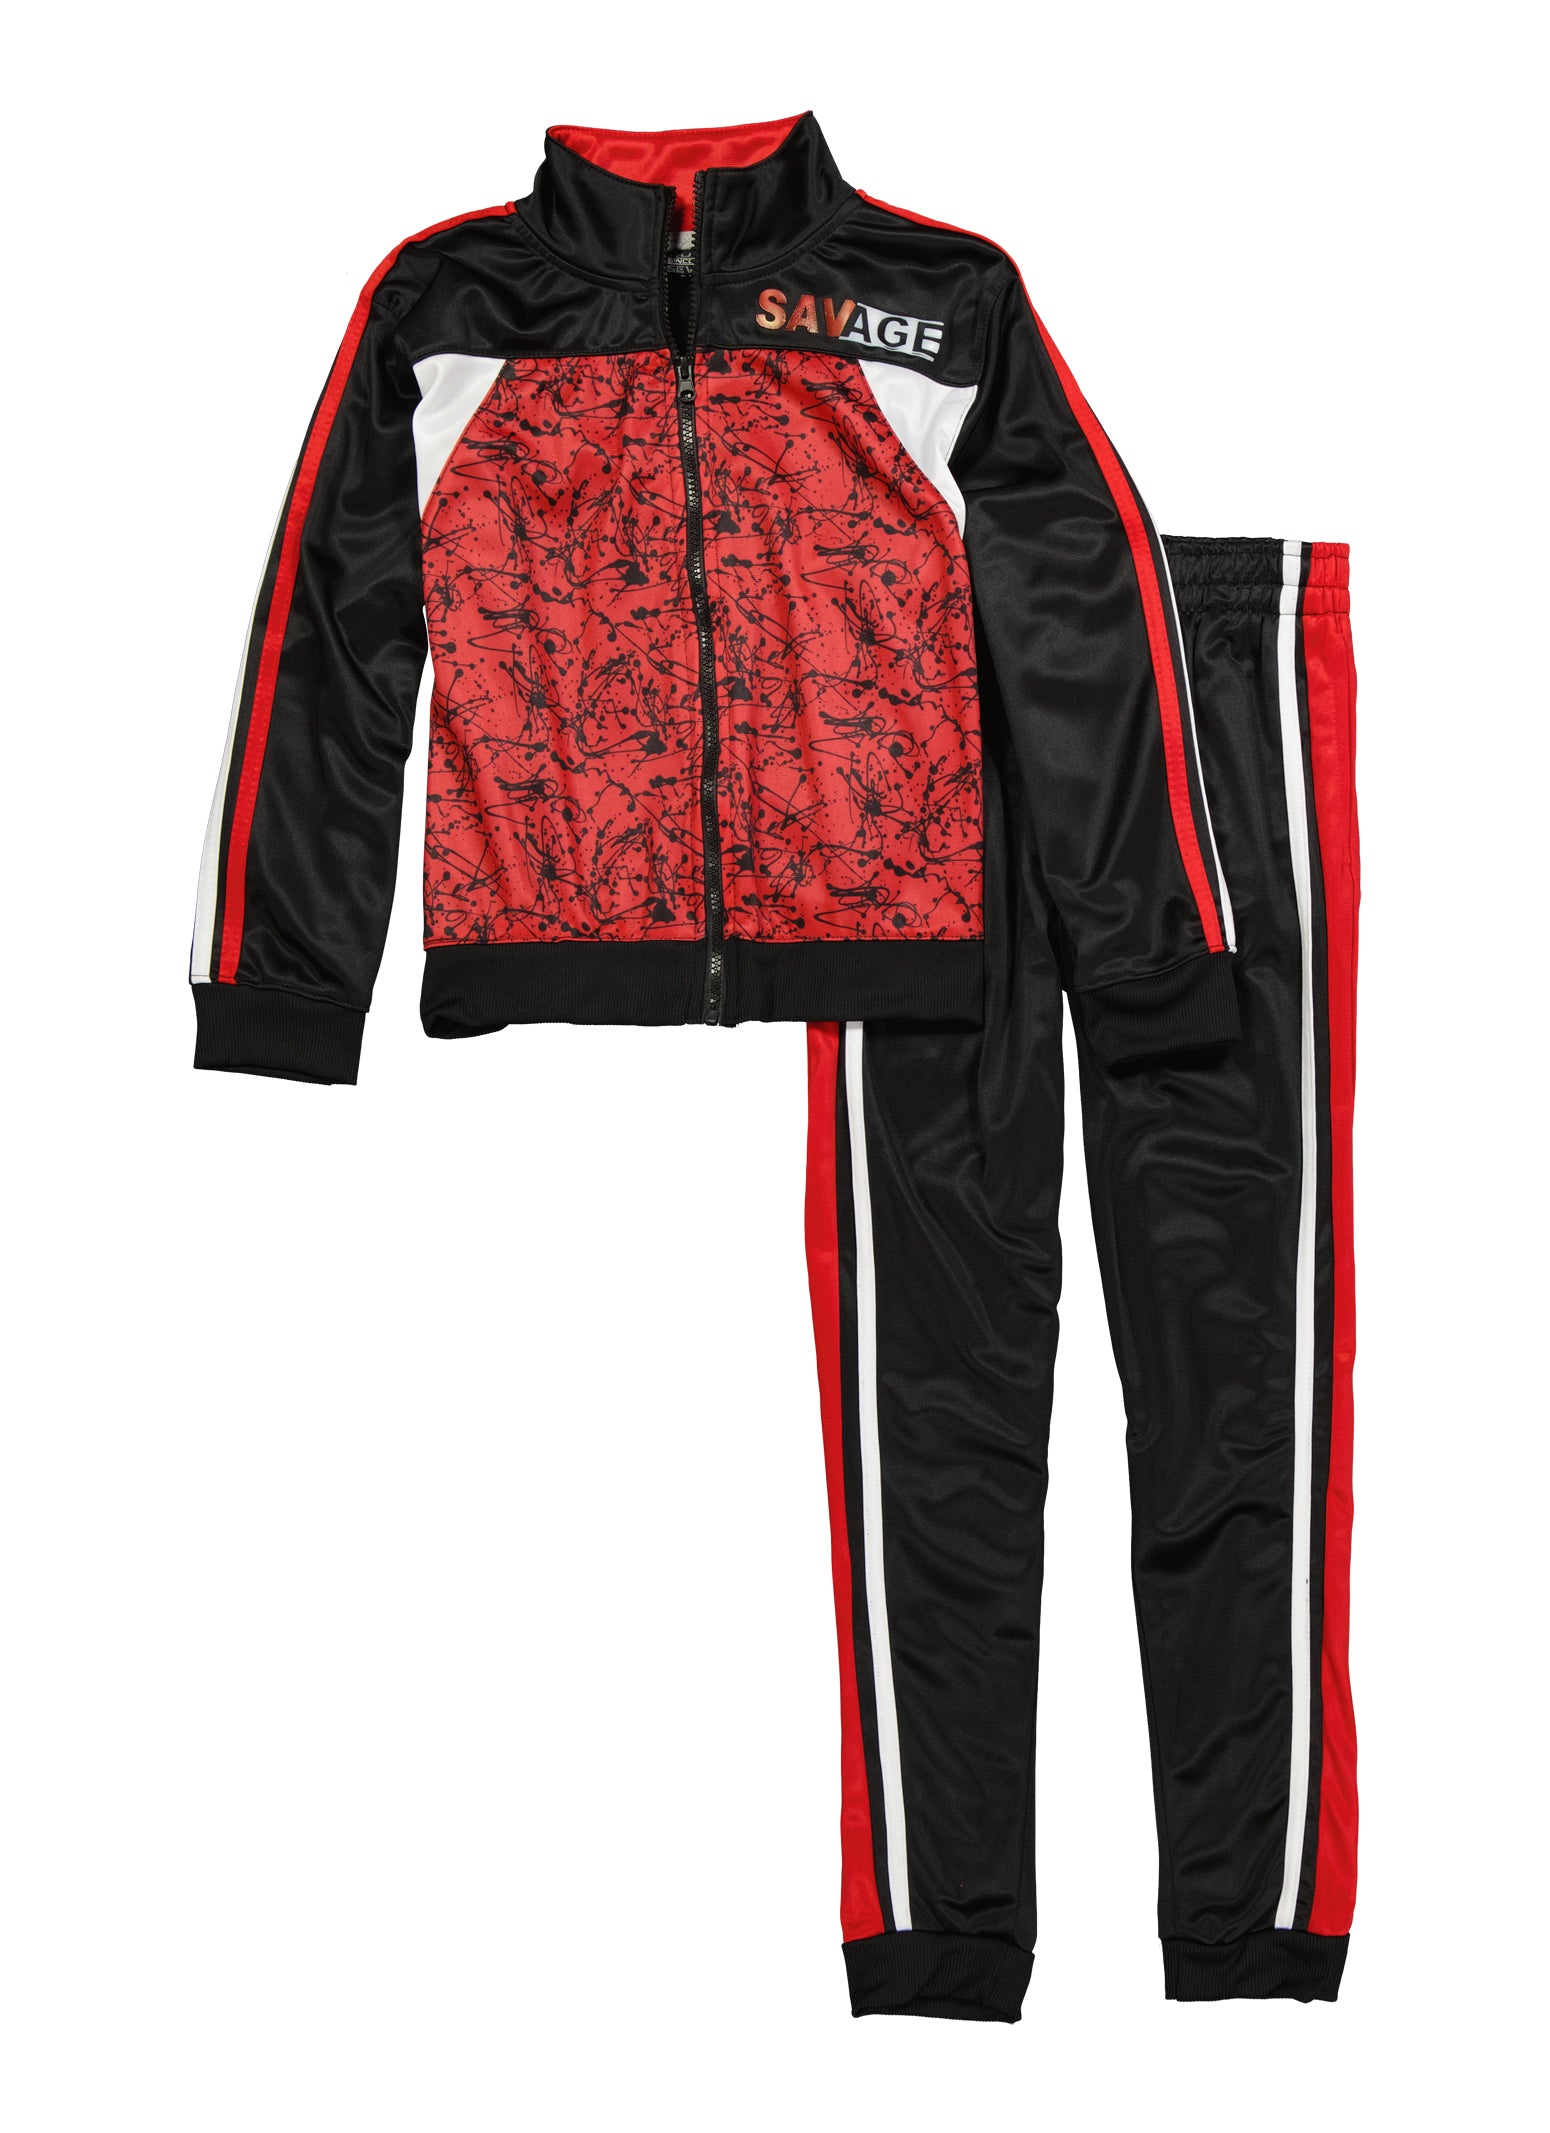 Boys Savage Paint Splatter Track Jacket and Pants, Red, Size 8-10